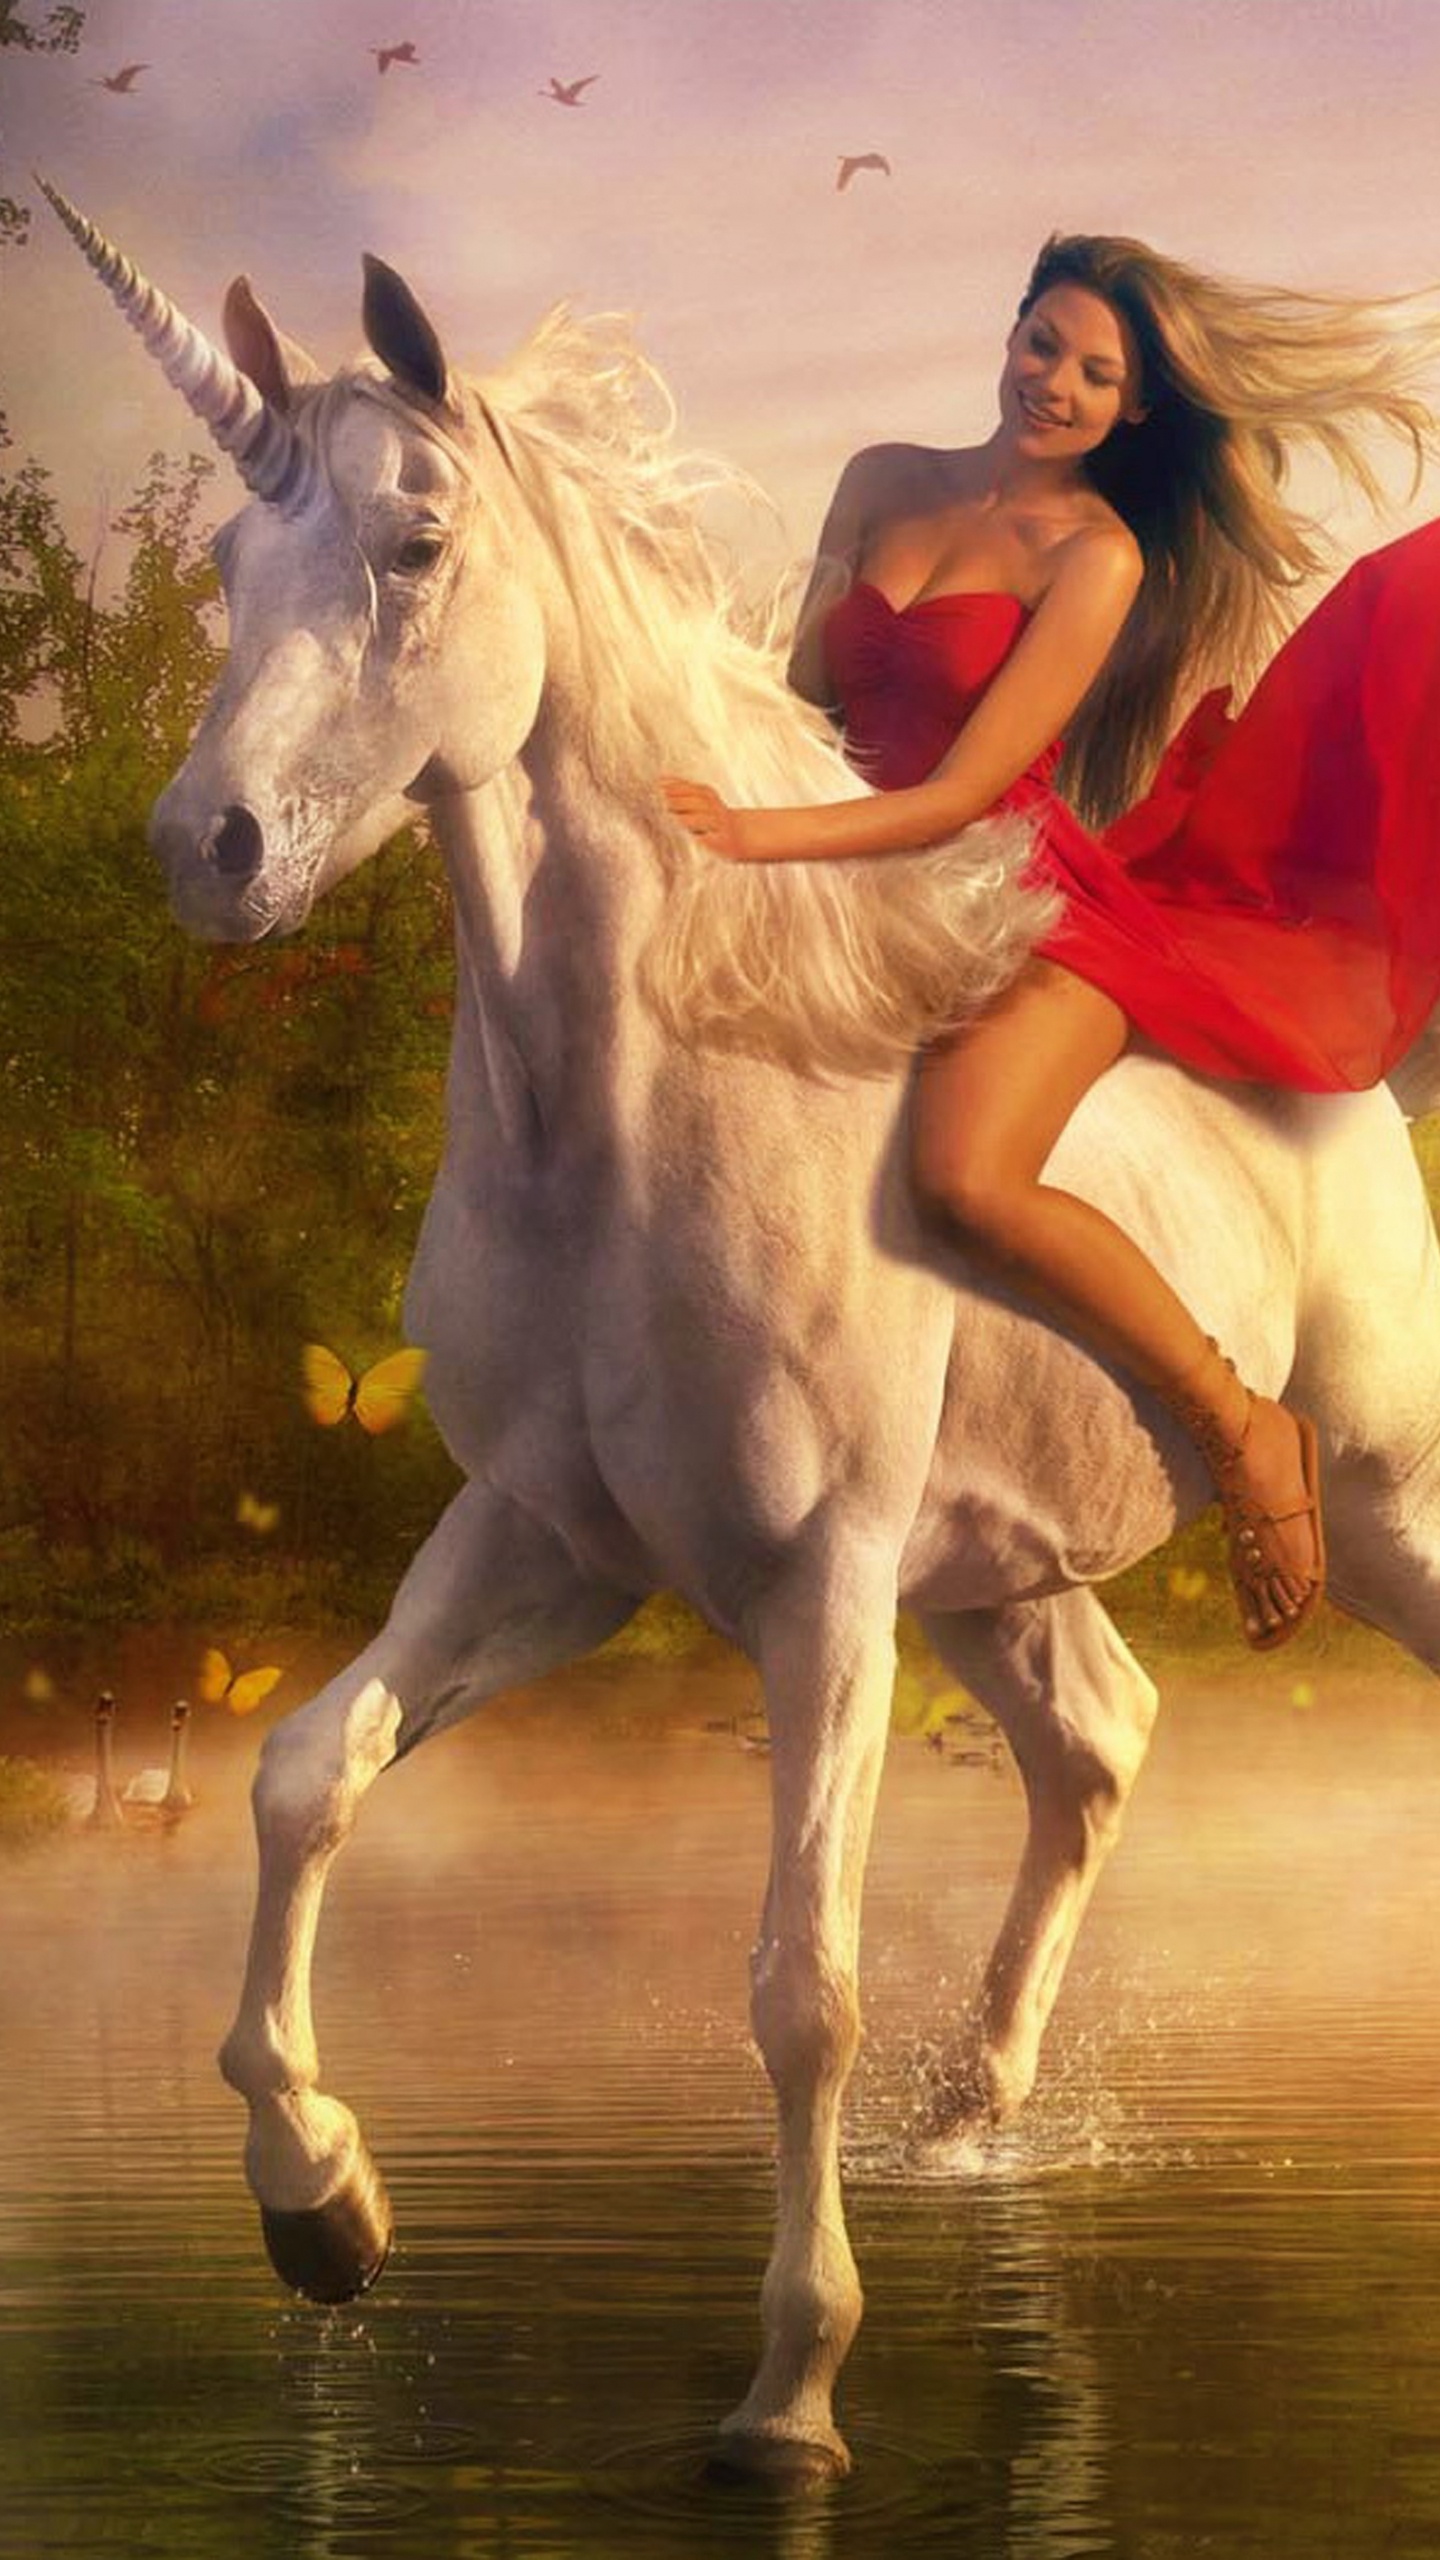 Woman in Red Dress Riding White Horse on Water. Wallpaper in 1440x2560 Resolution